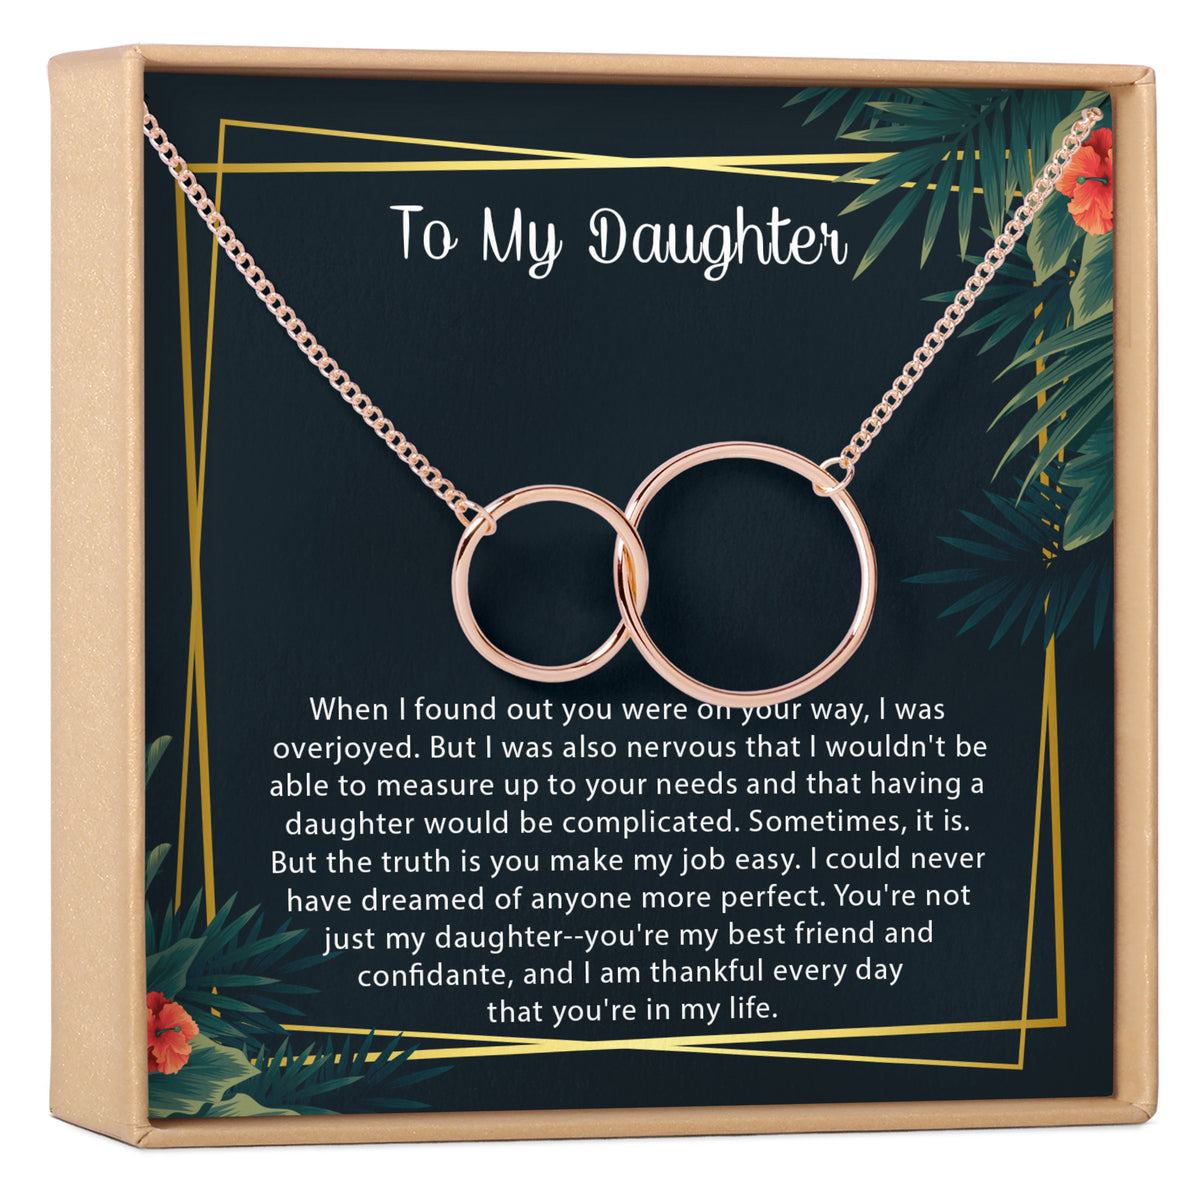 Mother &amp; Daughter Necklace